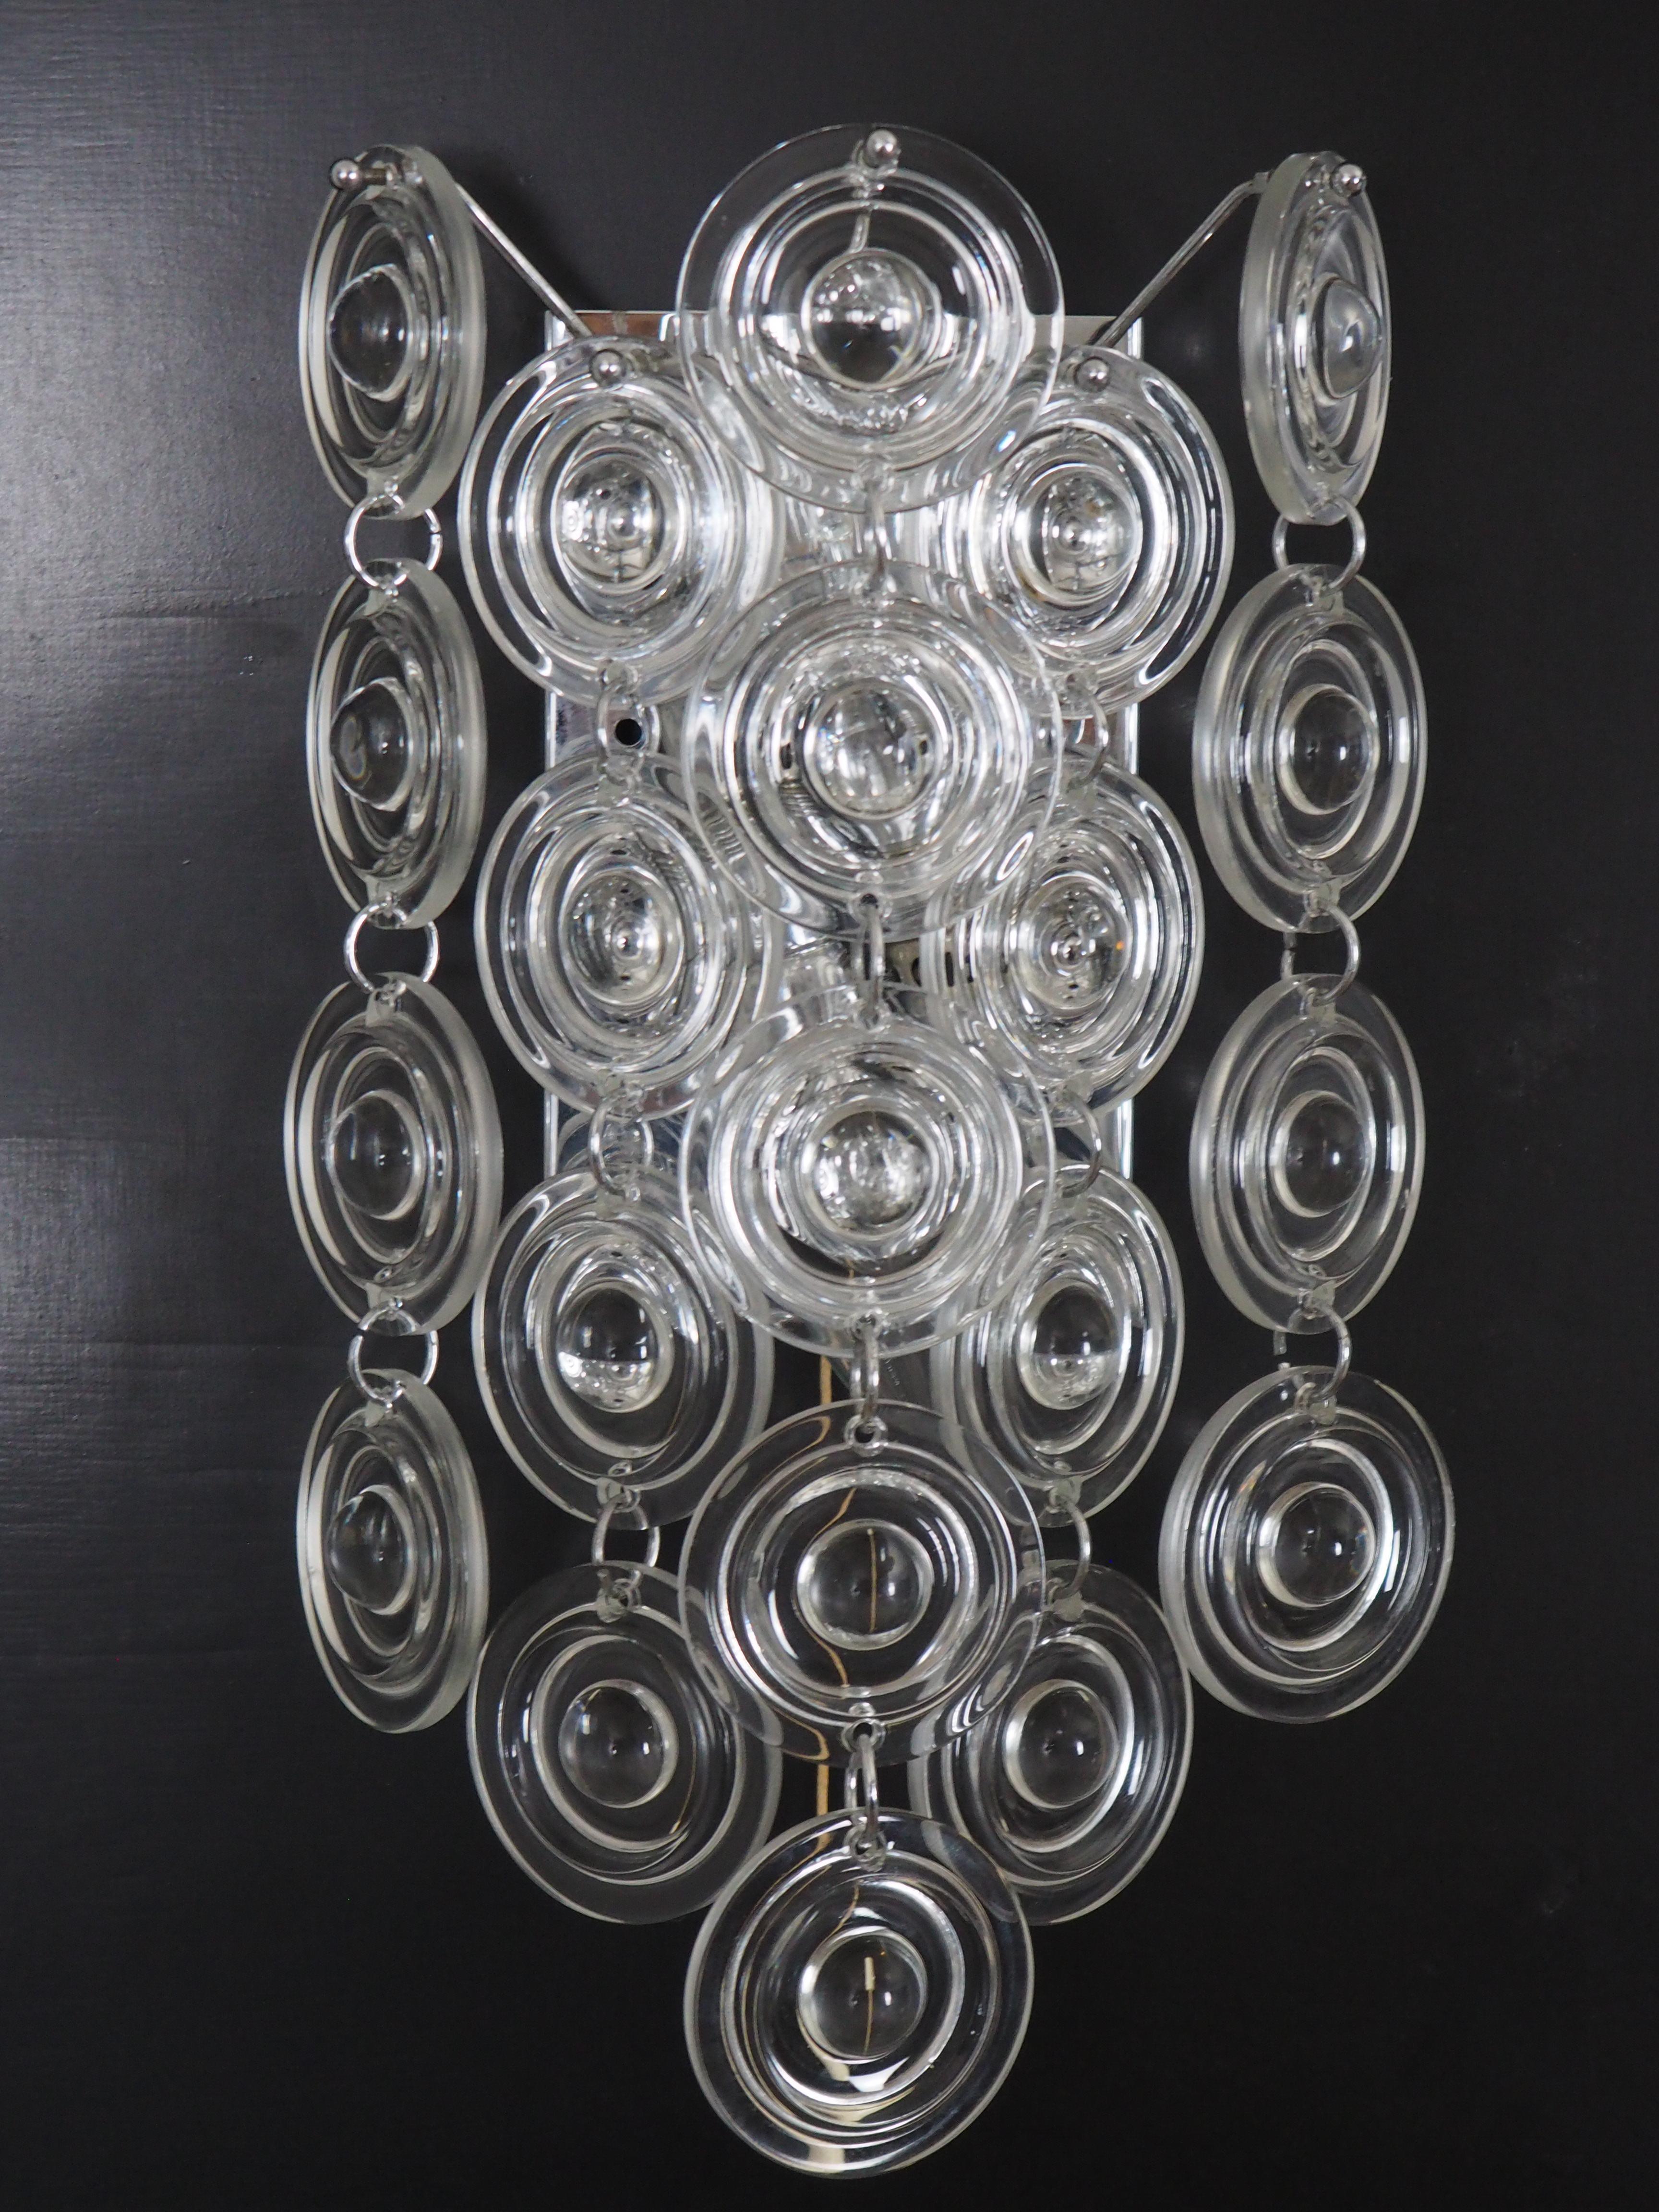 Pair of rare Mid-Century Modern glass and nickel wall sconces by Sciolari, Italy, circa 1970s.
This high quality pieces are made of many clear Murano glass disk hanging on the nickeled brass frame.

The dimension of the wall sconces are 12.59